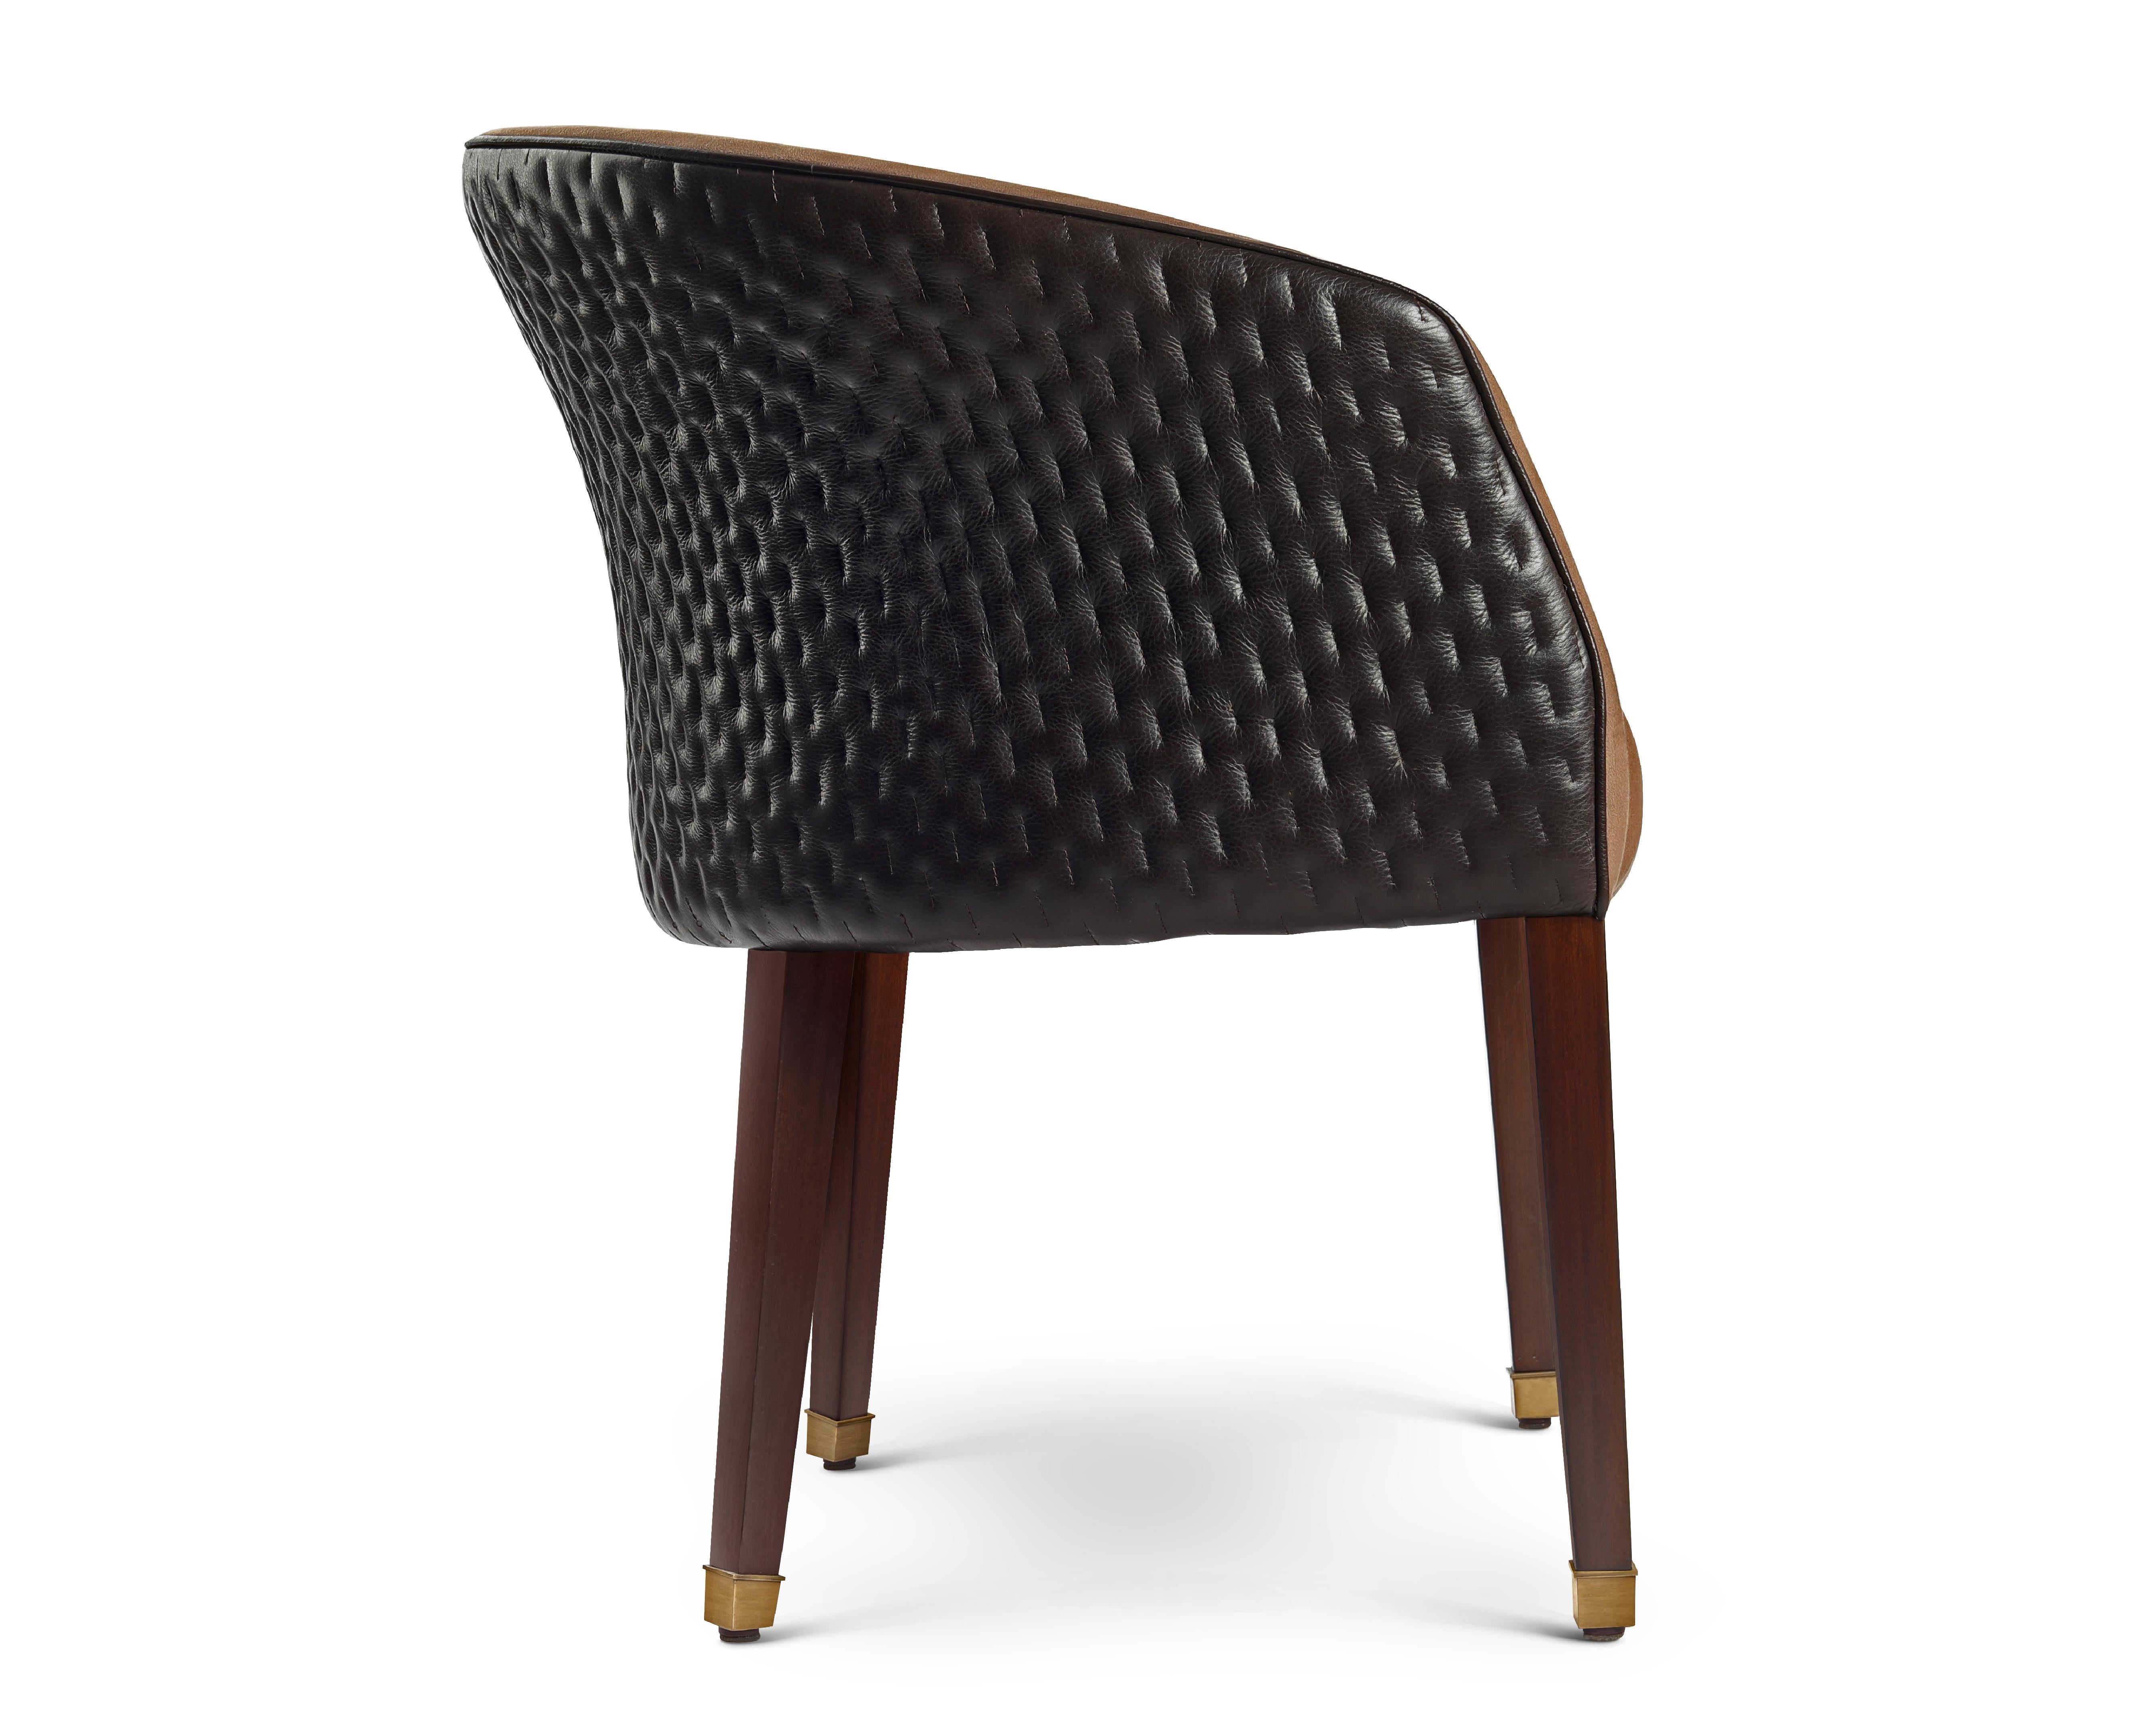 Other Hand Stitched Leather Marla Armchair by Madheke For Sale